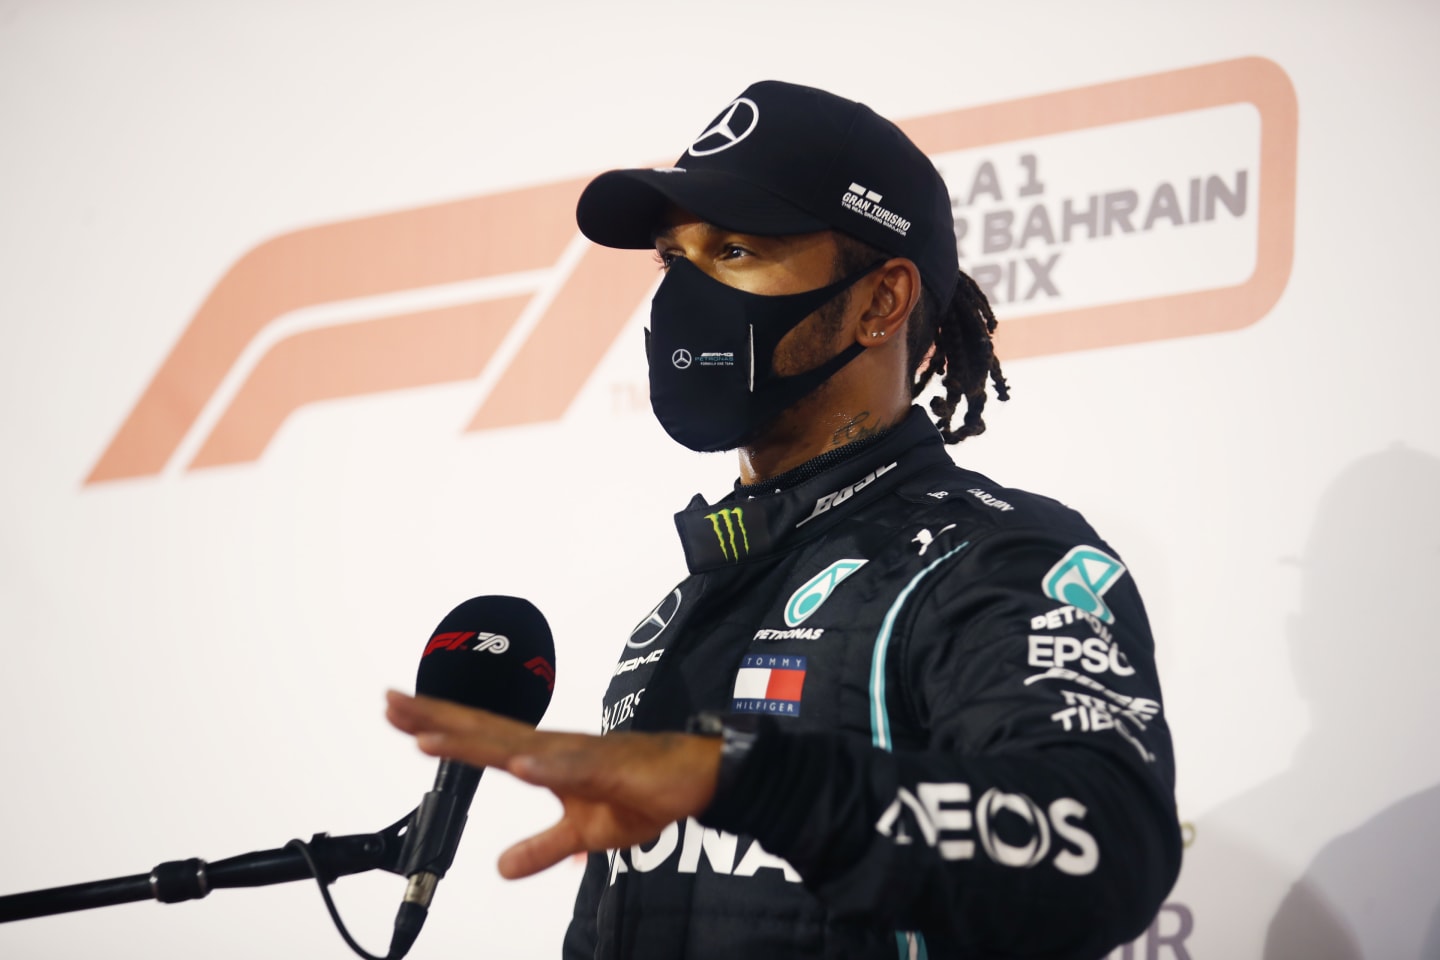 BAHRAIN, BAHRAIN - NOVEMBER 28: Pole position qualifier Lewis Hamilton of Great Britain and Mercedes GP talks to the media in parc ferme during qualifying ahead of the F1 Grand Prix of Bahrain at Bahrain International Circuit on November 28, 2020 in Bahrain, Bahrain. (Photo by Hamad Mohammed - Pool/Getty Images)